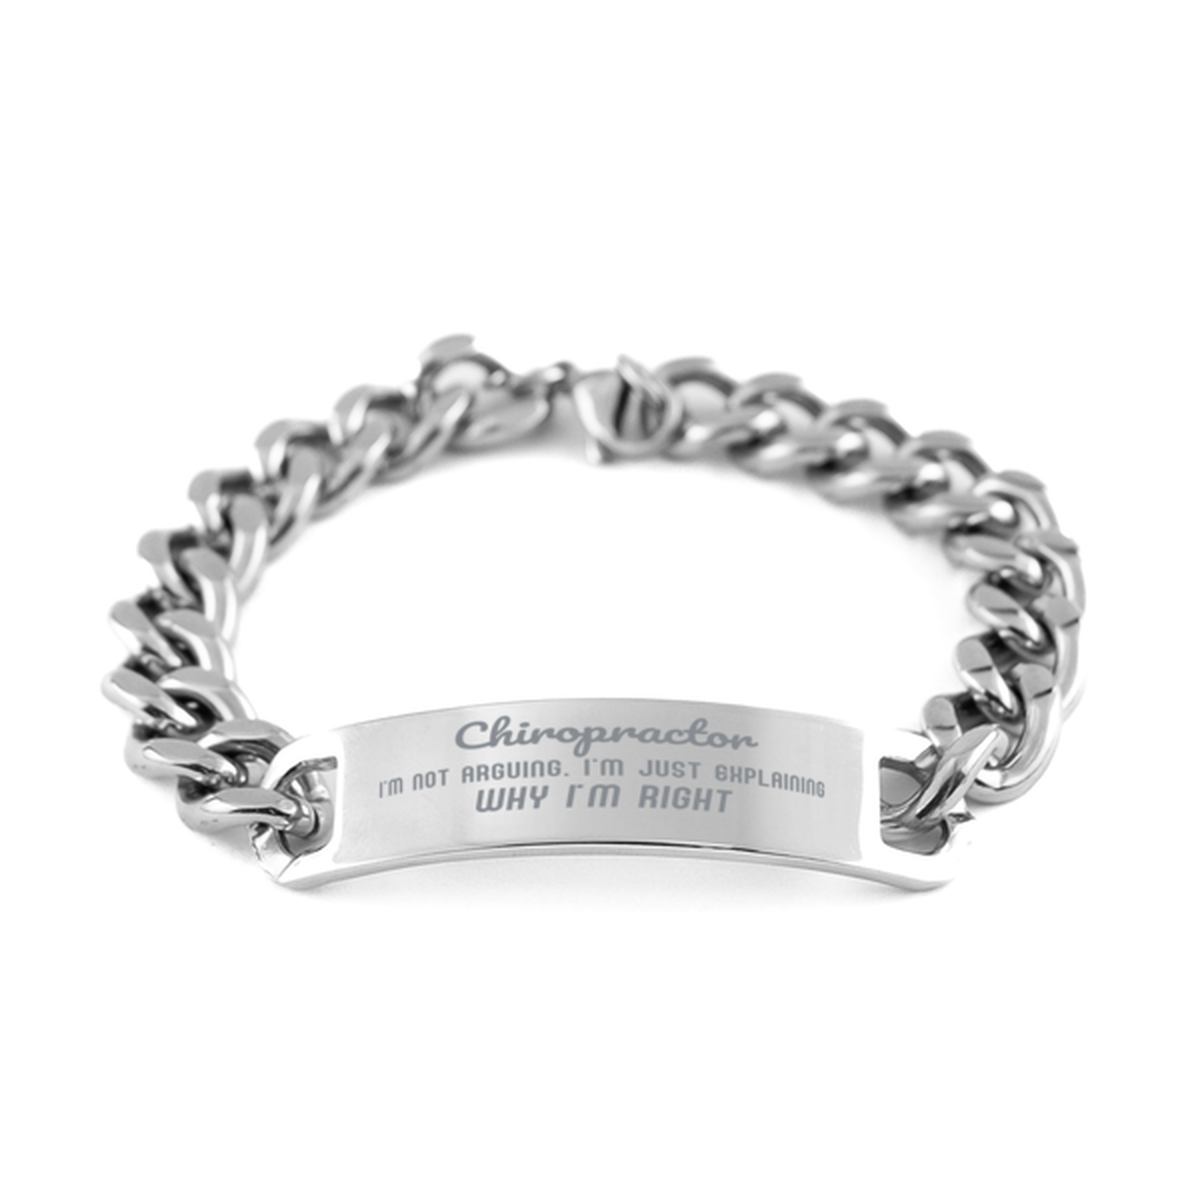 Chiropractor I'm not Arguing. I'm Just Explaining Why I'm RIGHT Cuban Chain Stainless Steel Bracelet, Graduation Birthday Christmas Chiropractor Gifts For Chiropractor Funny Saying Quote Present for Men Women Coworker